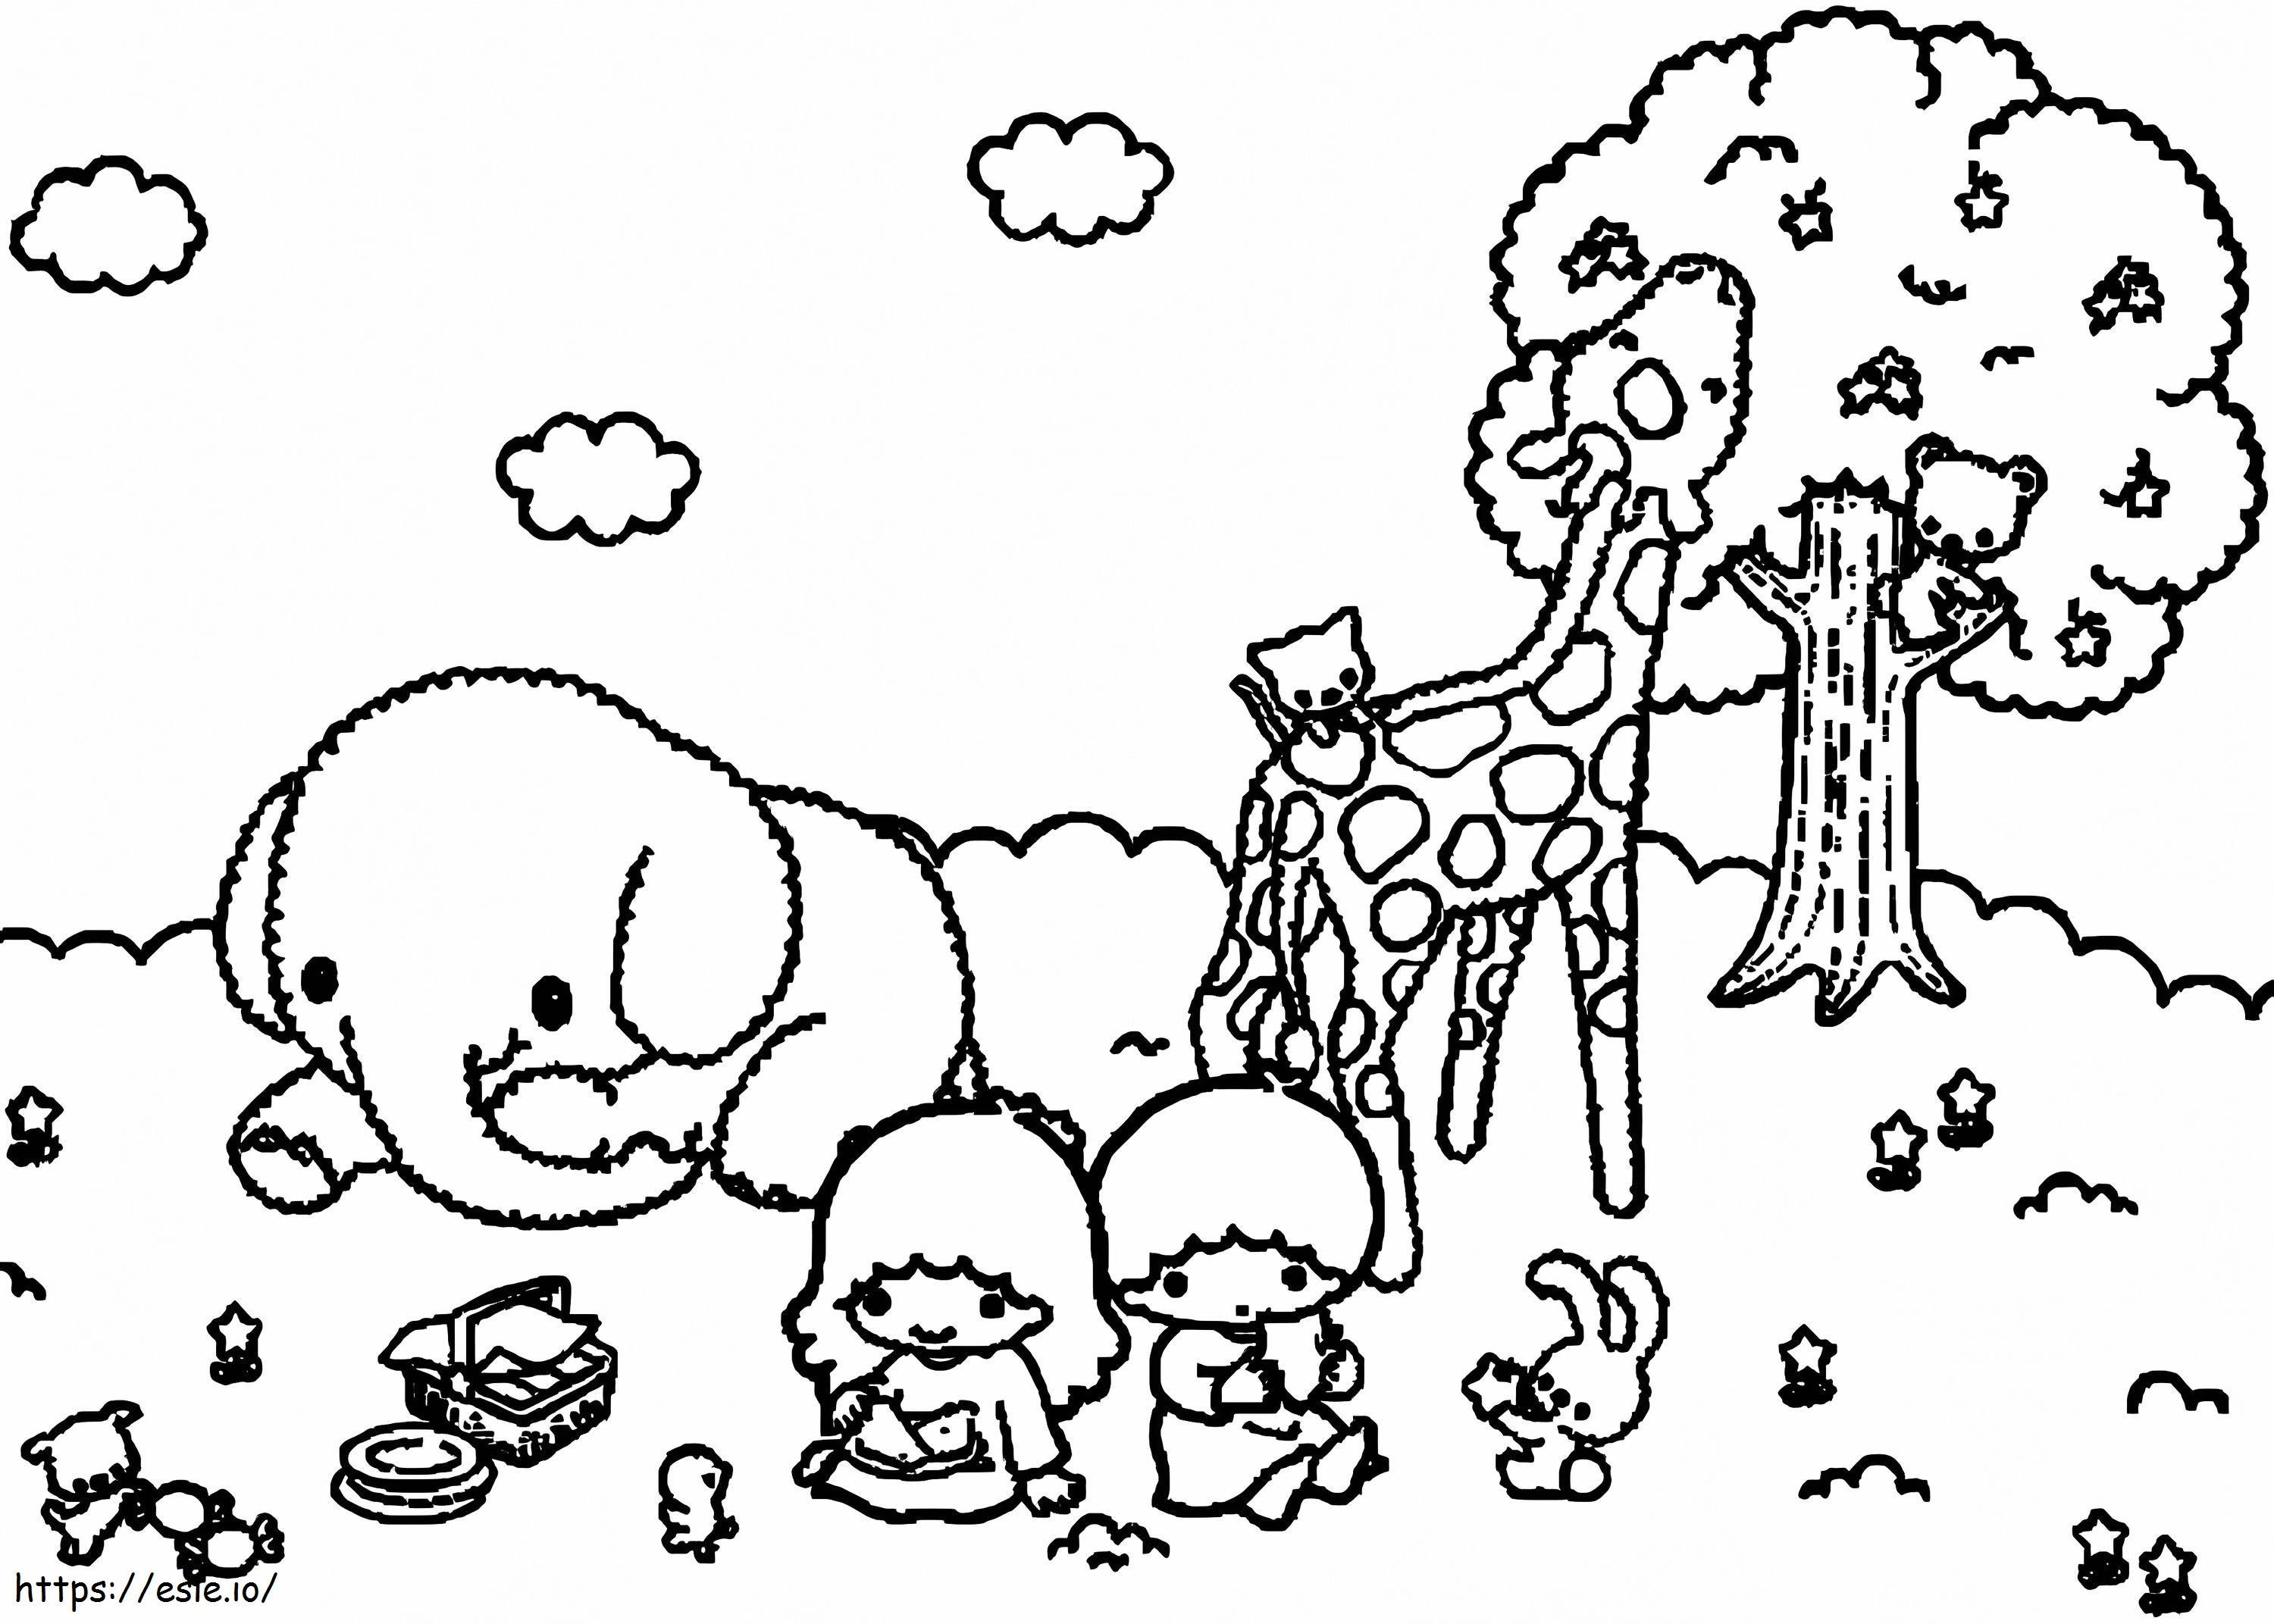 Little Twin Stars With Animals coloring page